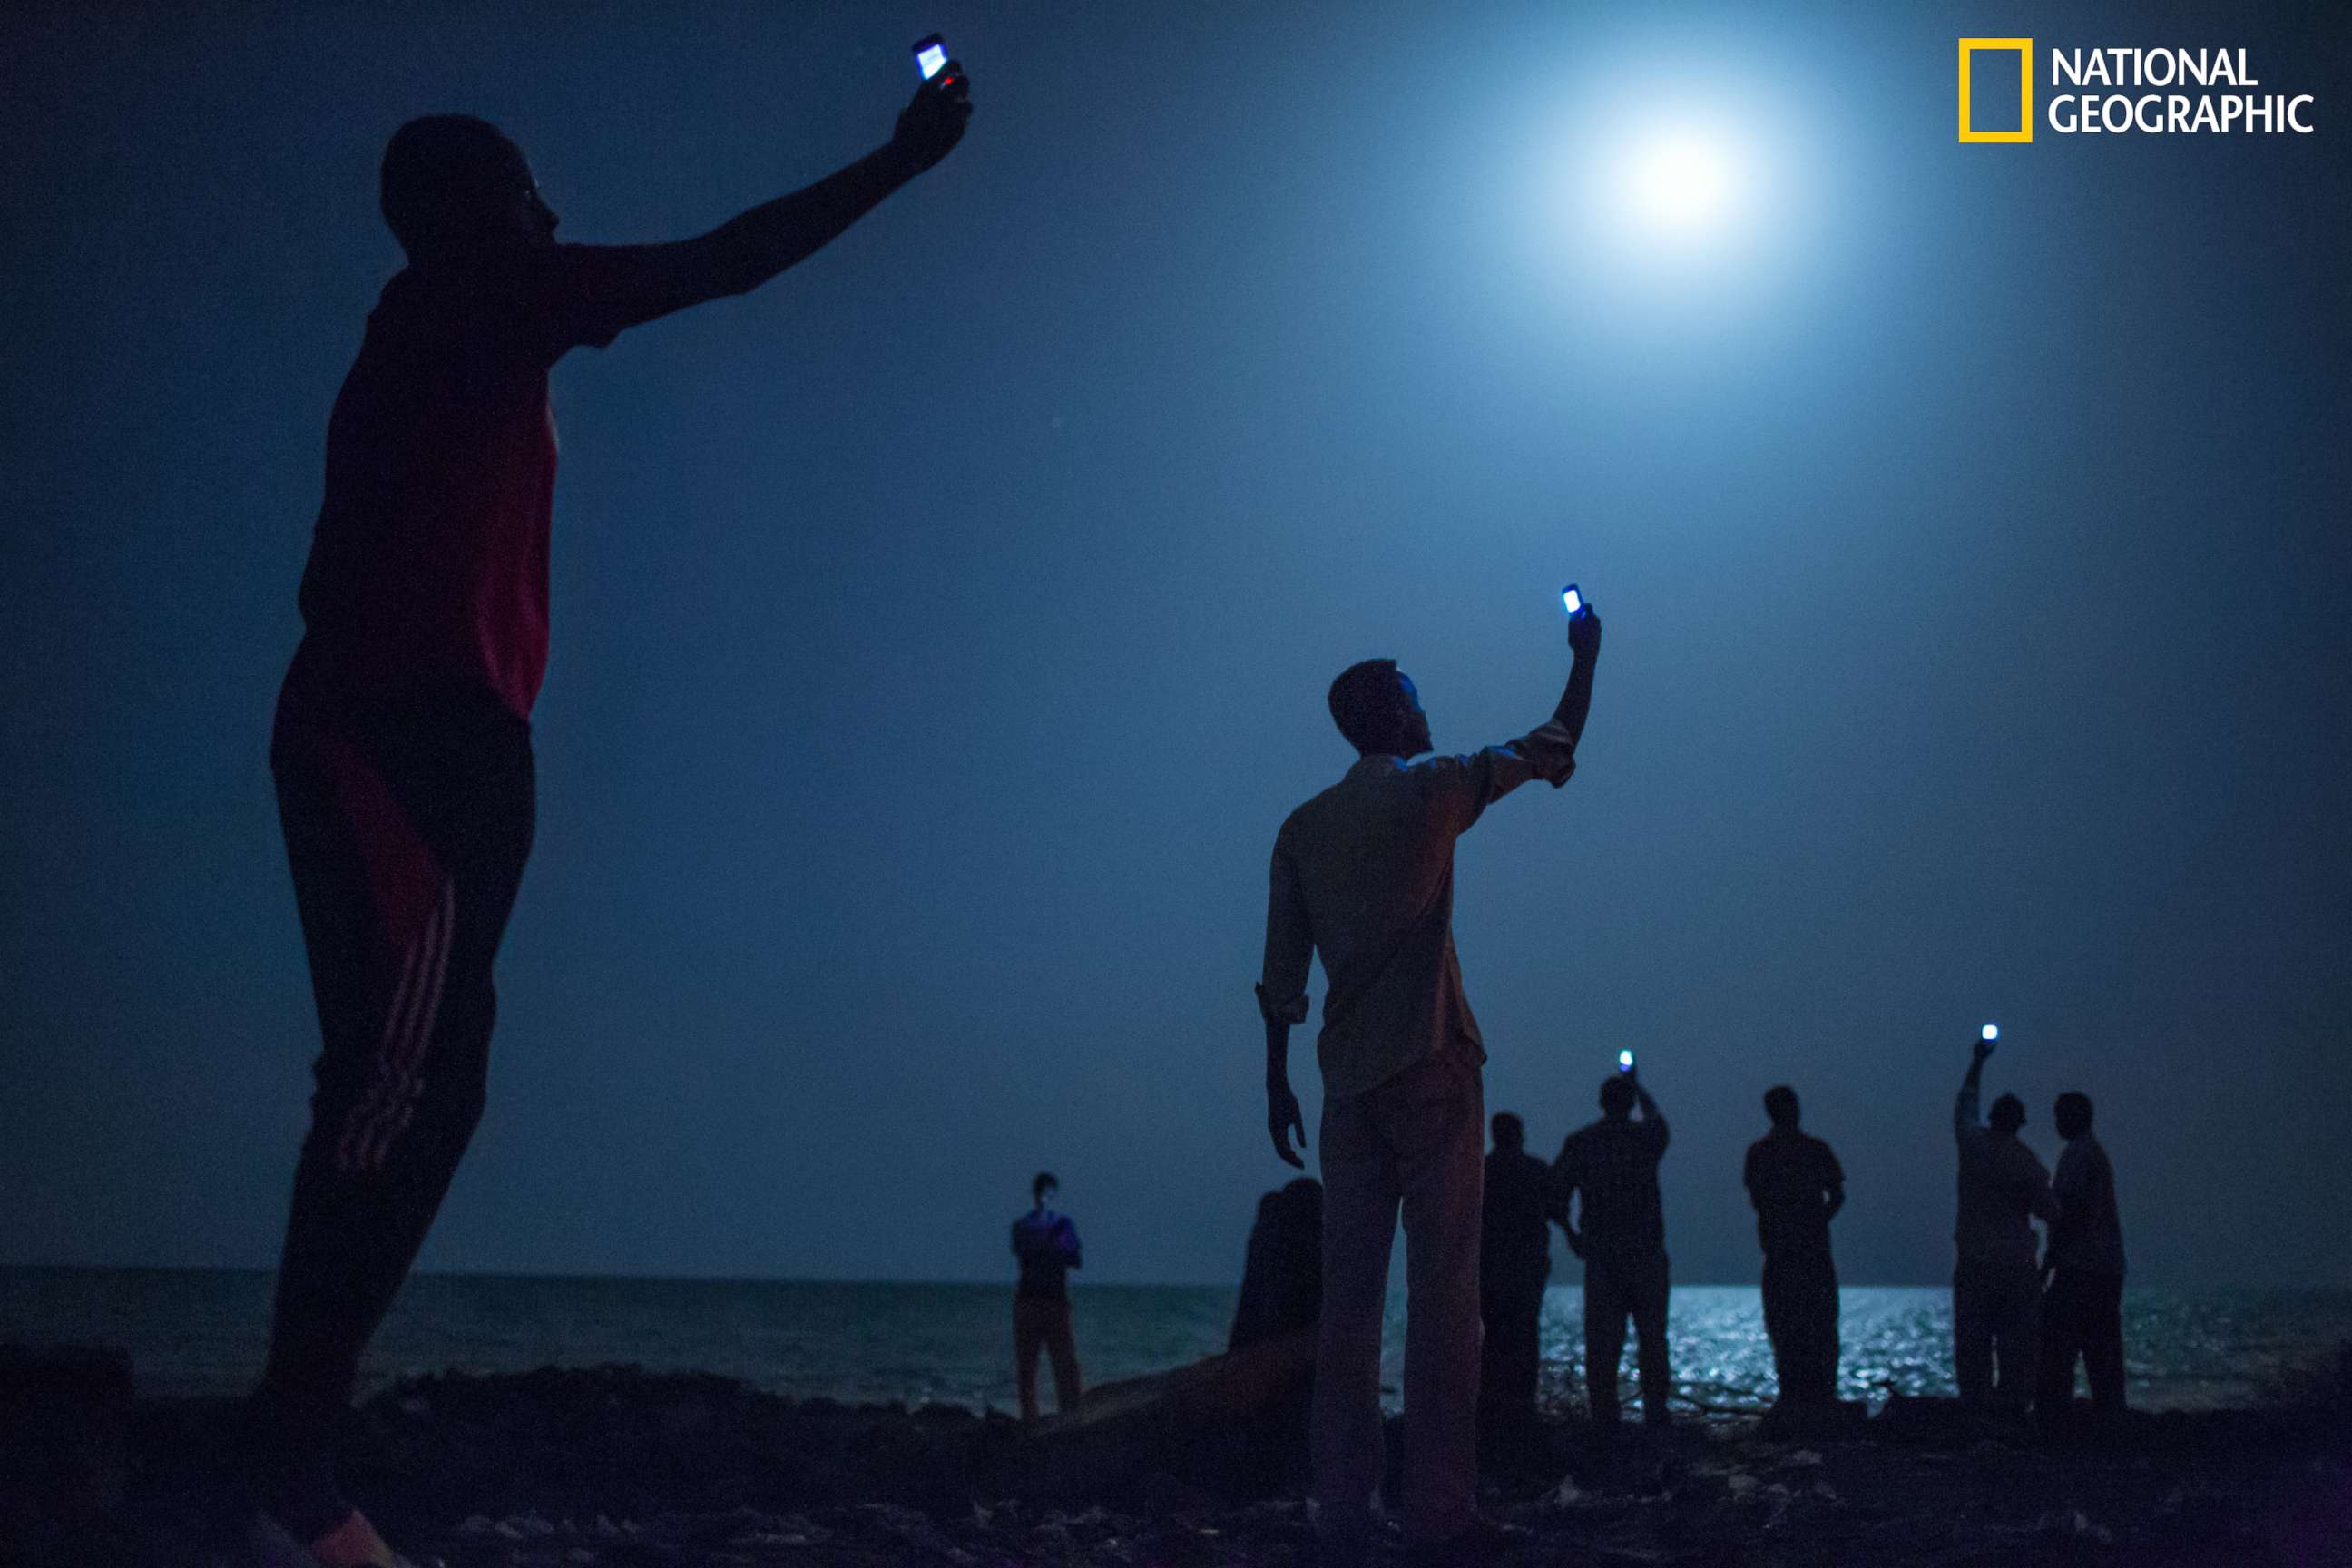 PHOTO: Impoverished African migrants crowd the night shore of Djibouti city, trying to capture inexpensive cell signals from neighboring Somalia—a tenuous link to relatives abroad.